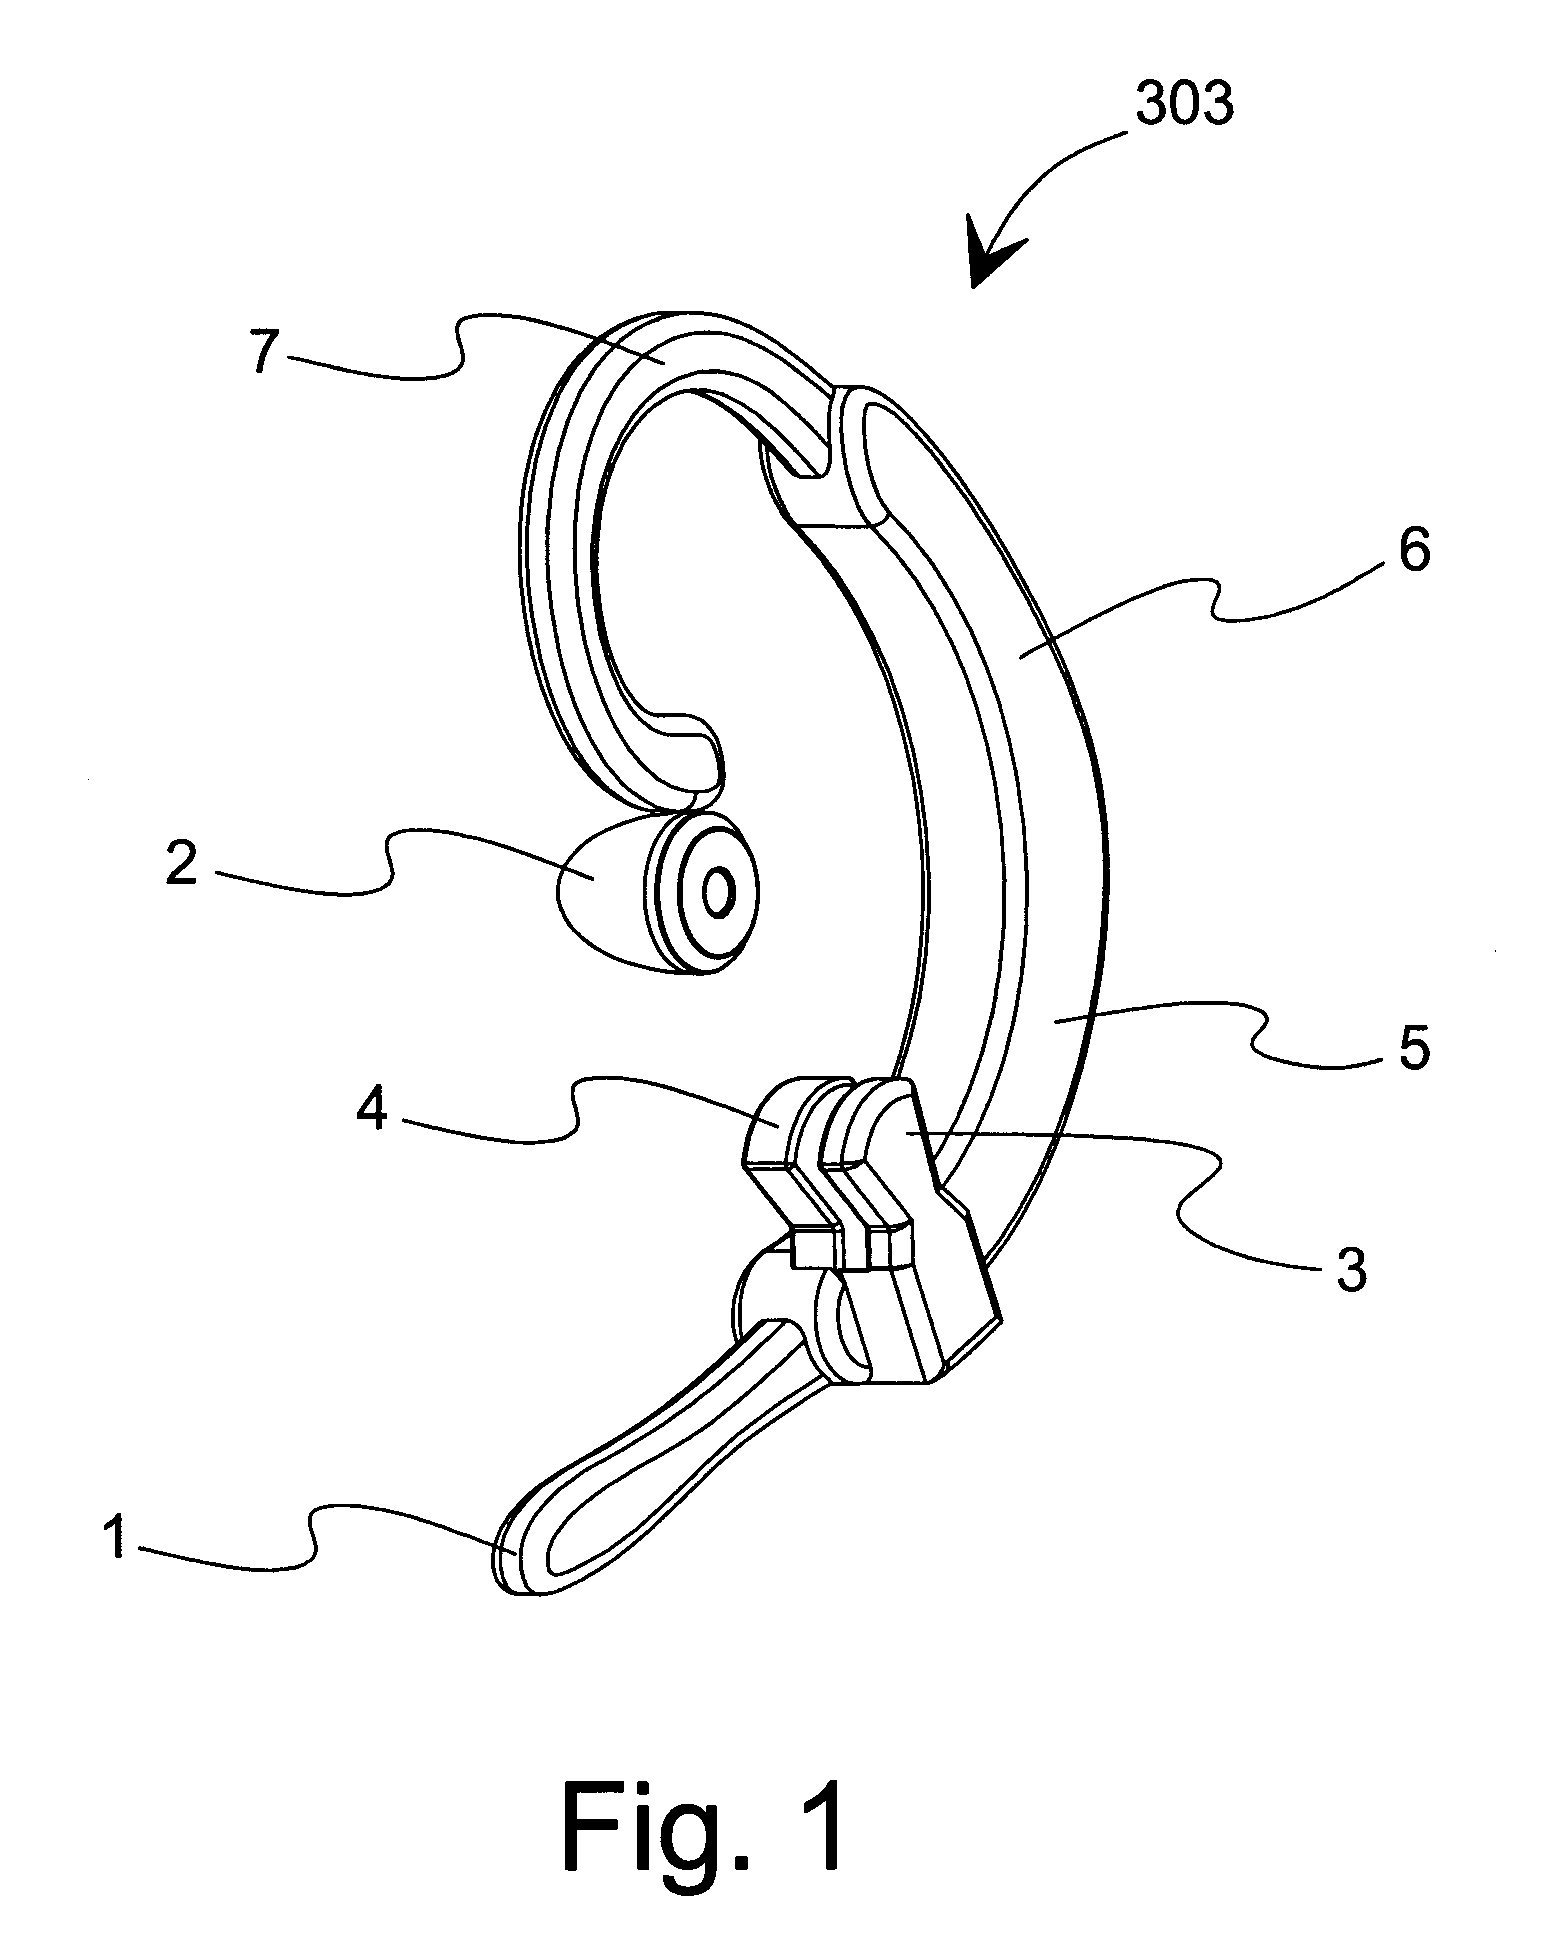 Wireless Health Monitor Device and System with Cognition